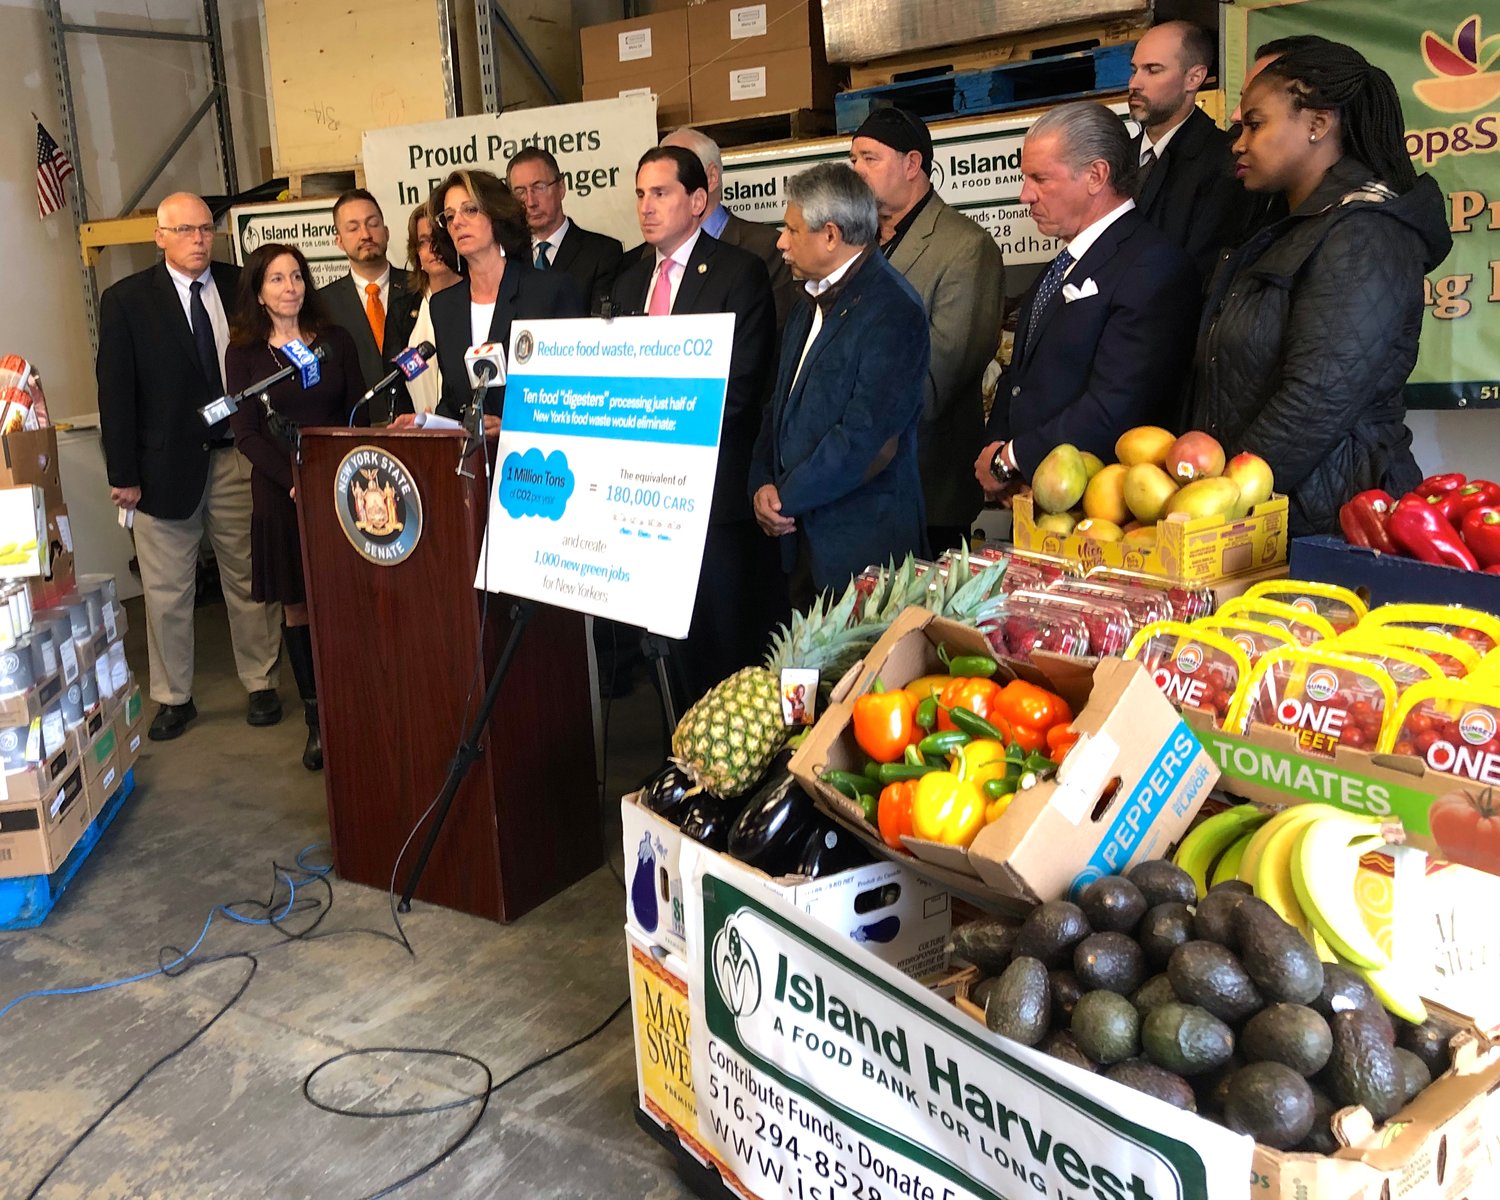 Island Harvest President Randi Shubin Dresner, at lectern, with State Sen. Todd Kaminsky to her right, was among the officials last Thursday to announce passage of a measure to reduce food in the waste stream by requiring large retailers to send unsellable but edible food to recovery organizations like Island Harvest.